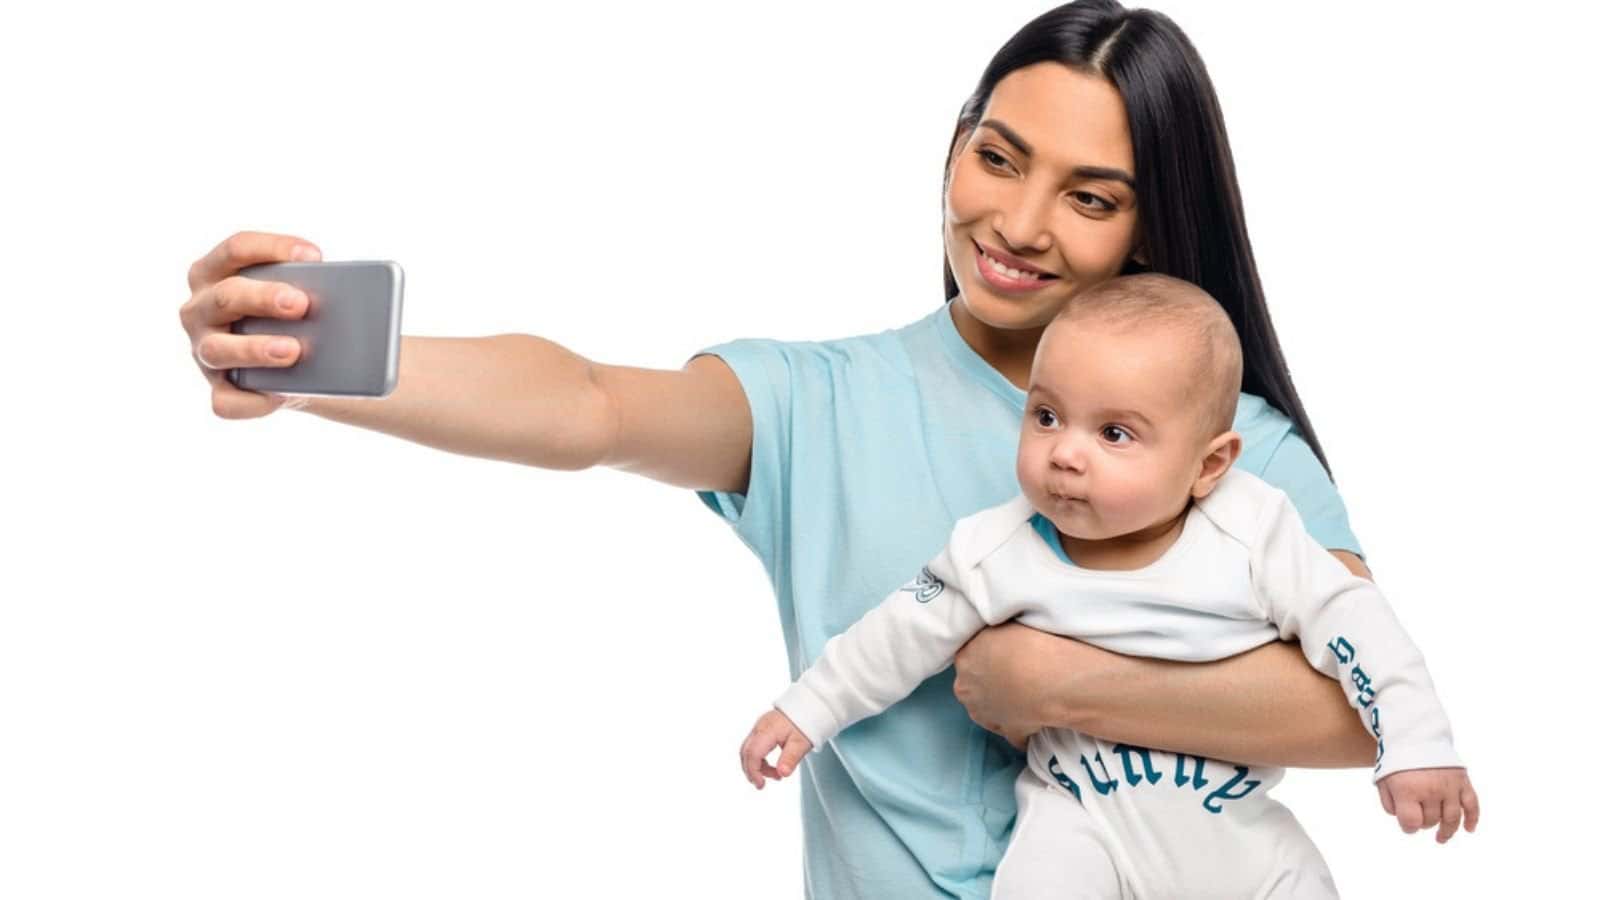 Portrait of smiling mother taking selfie together with little baby